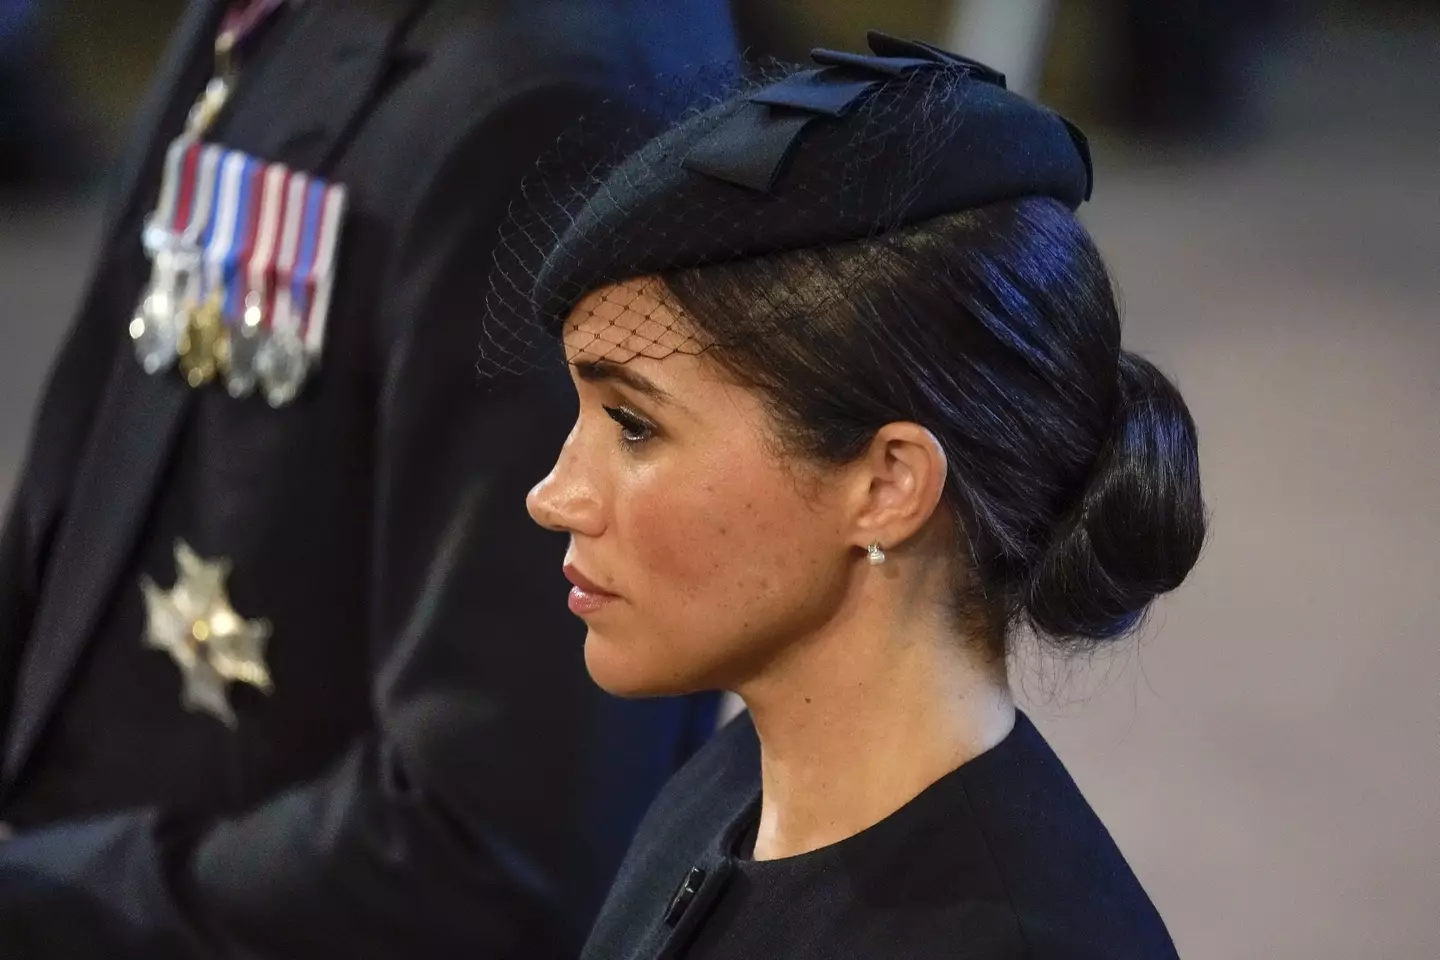 Meghan also wore her earrings as the Queen lay in state at Westminster Hall.